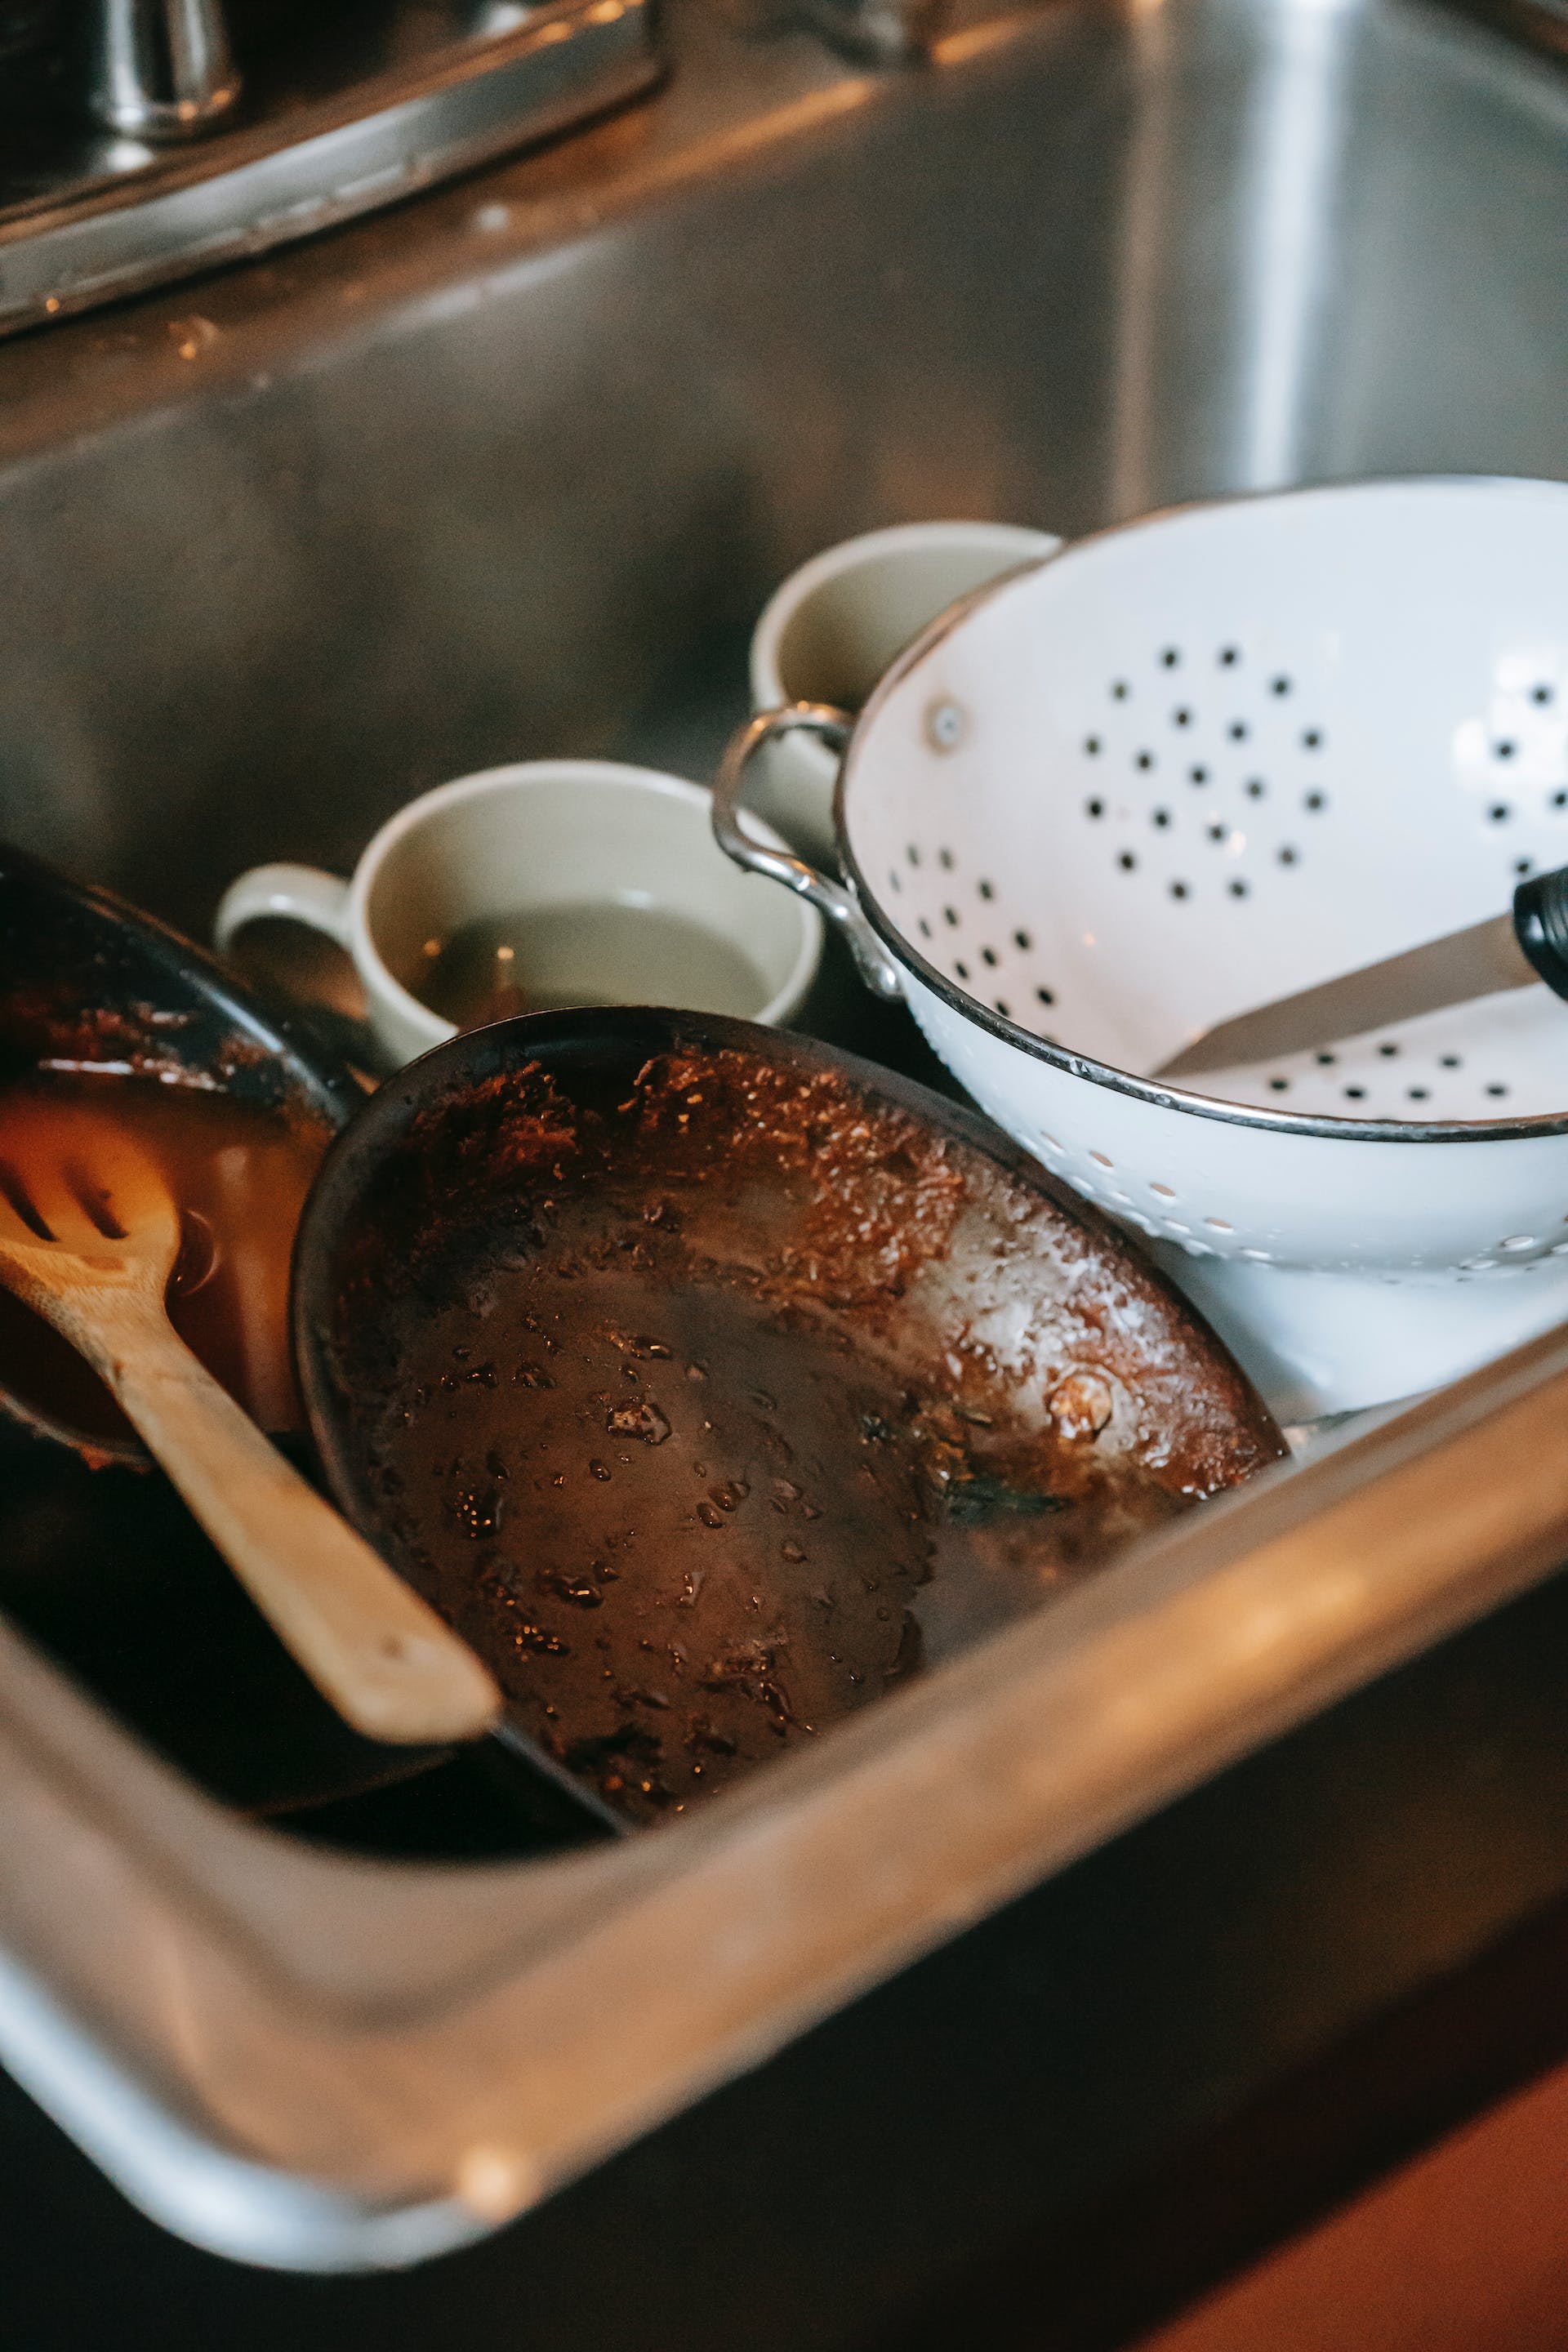 Dirty dishes in the sink | Source: Pexels